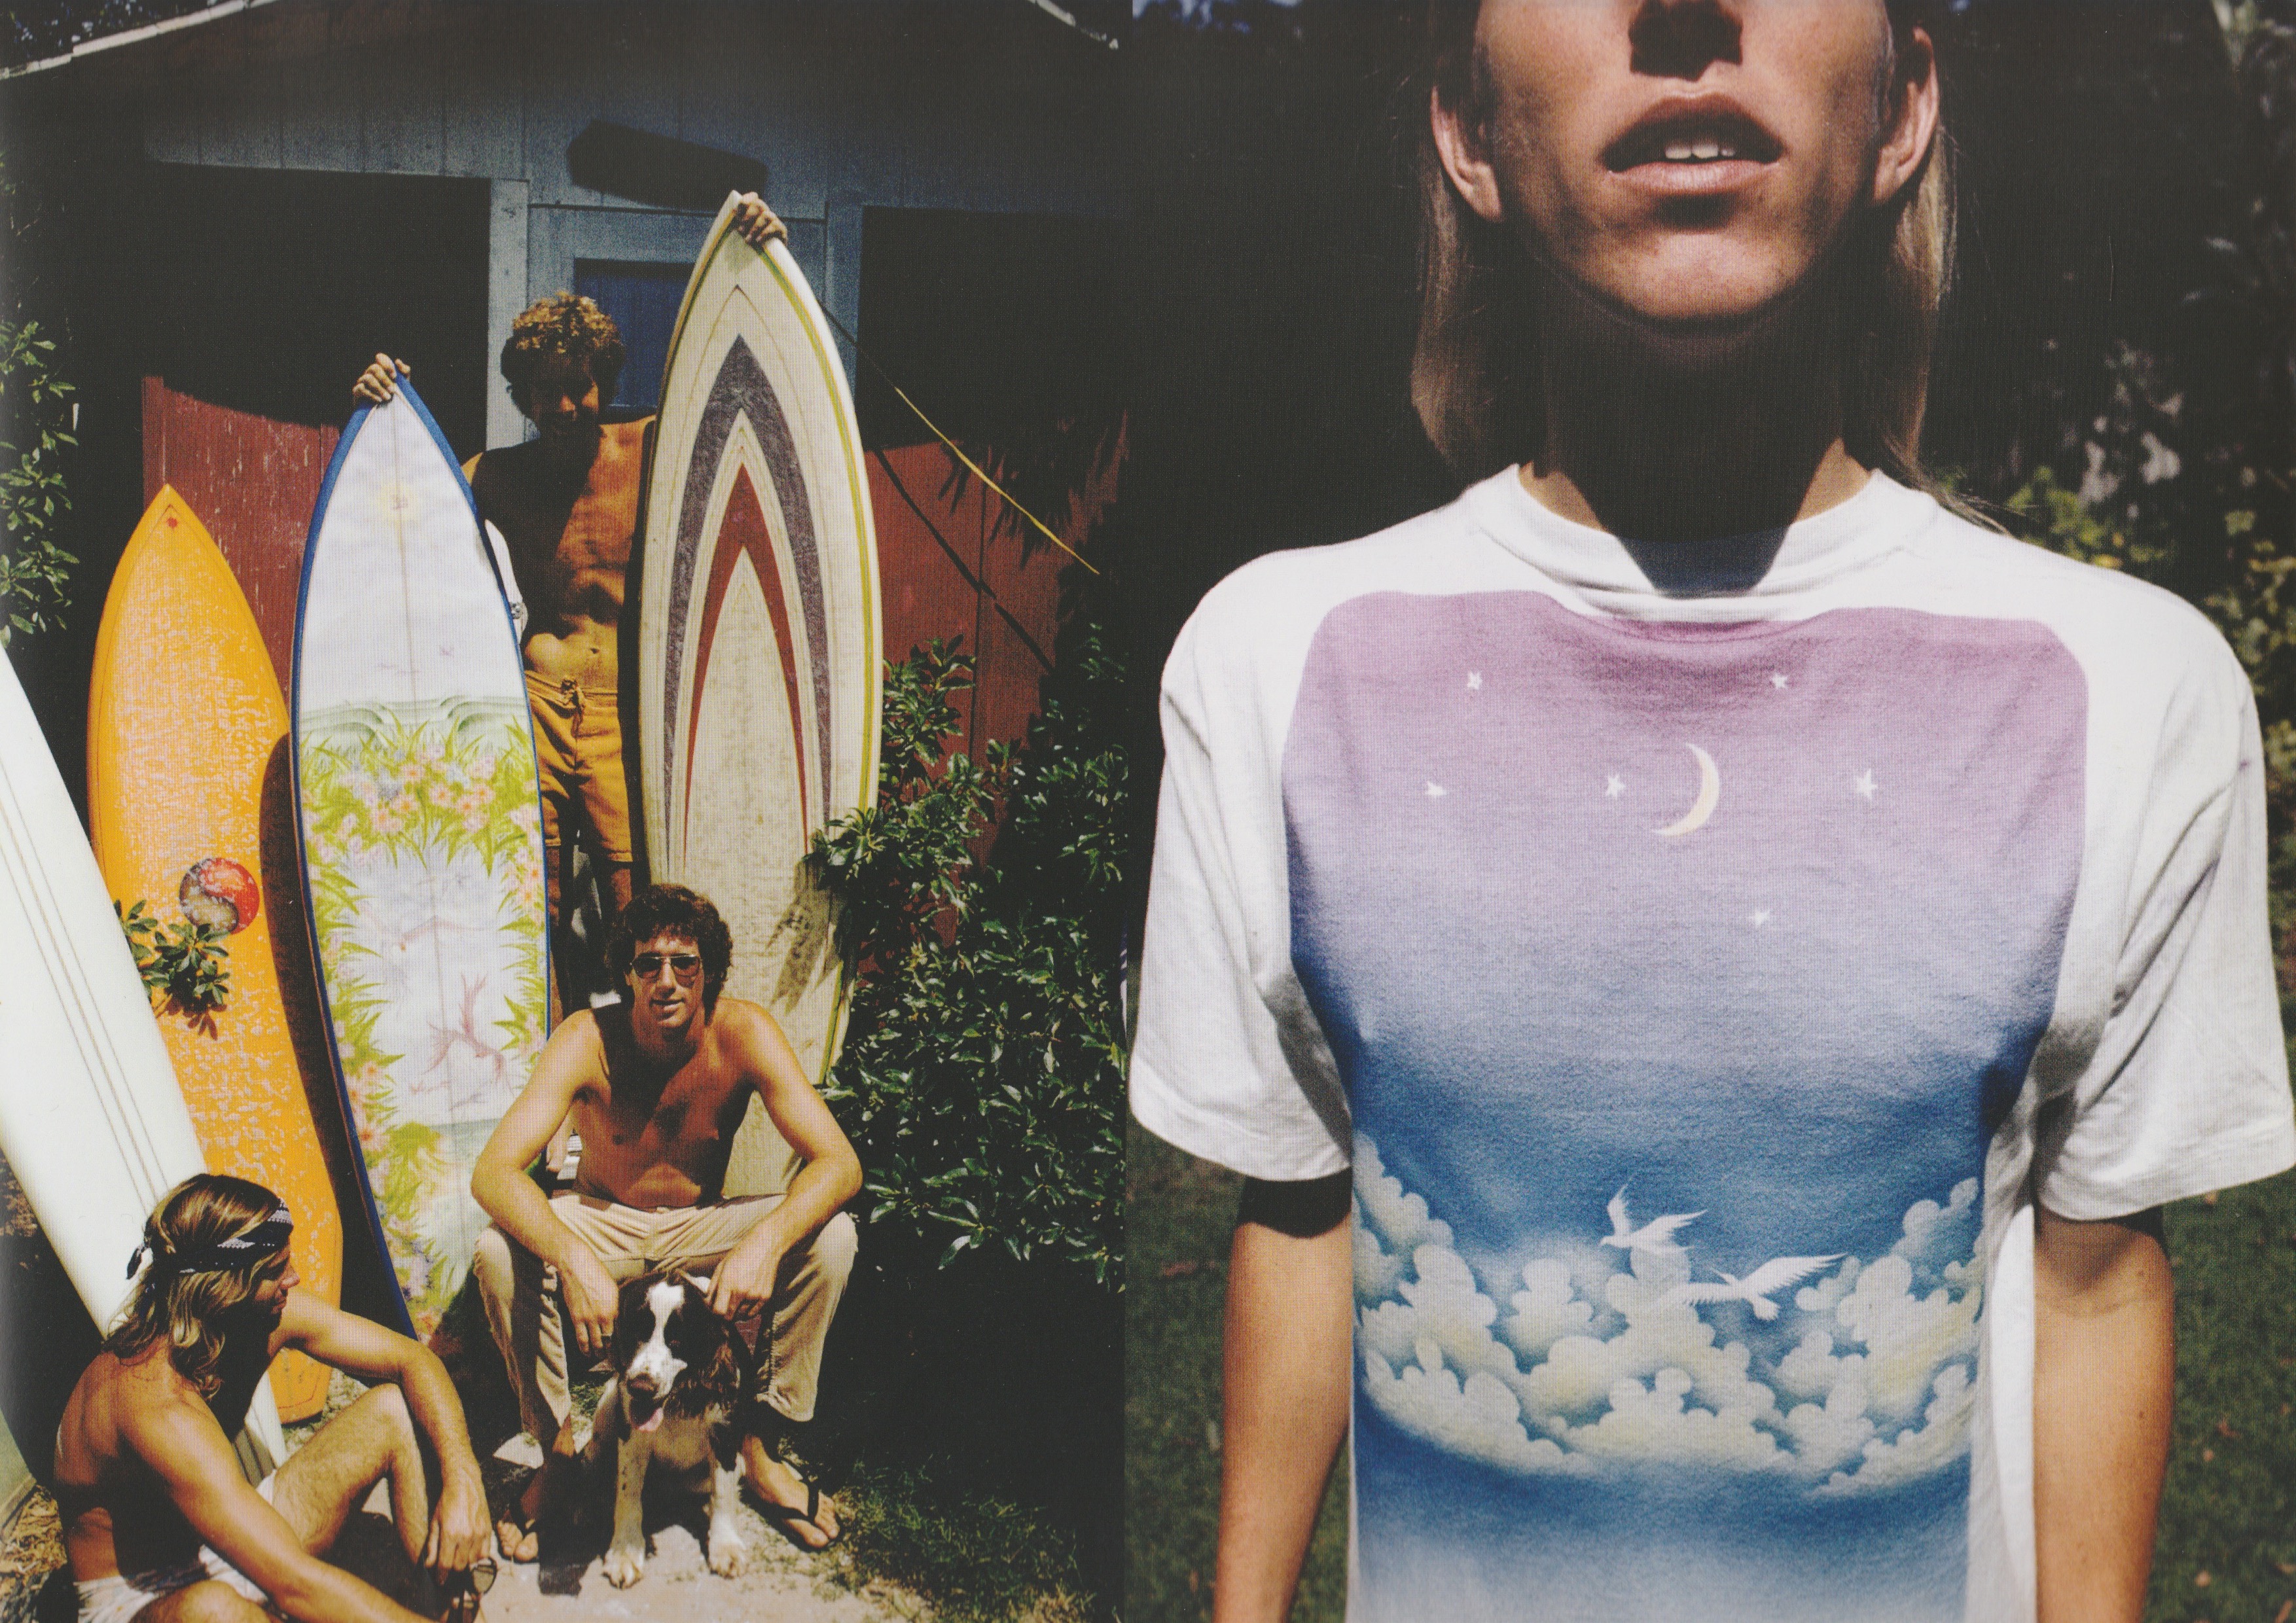 Jeff Divine will transport you back in time to the 70's surf scene